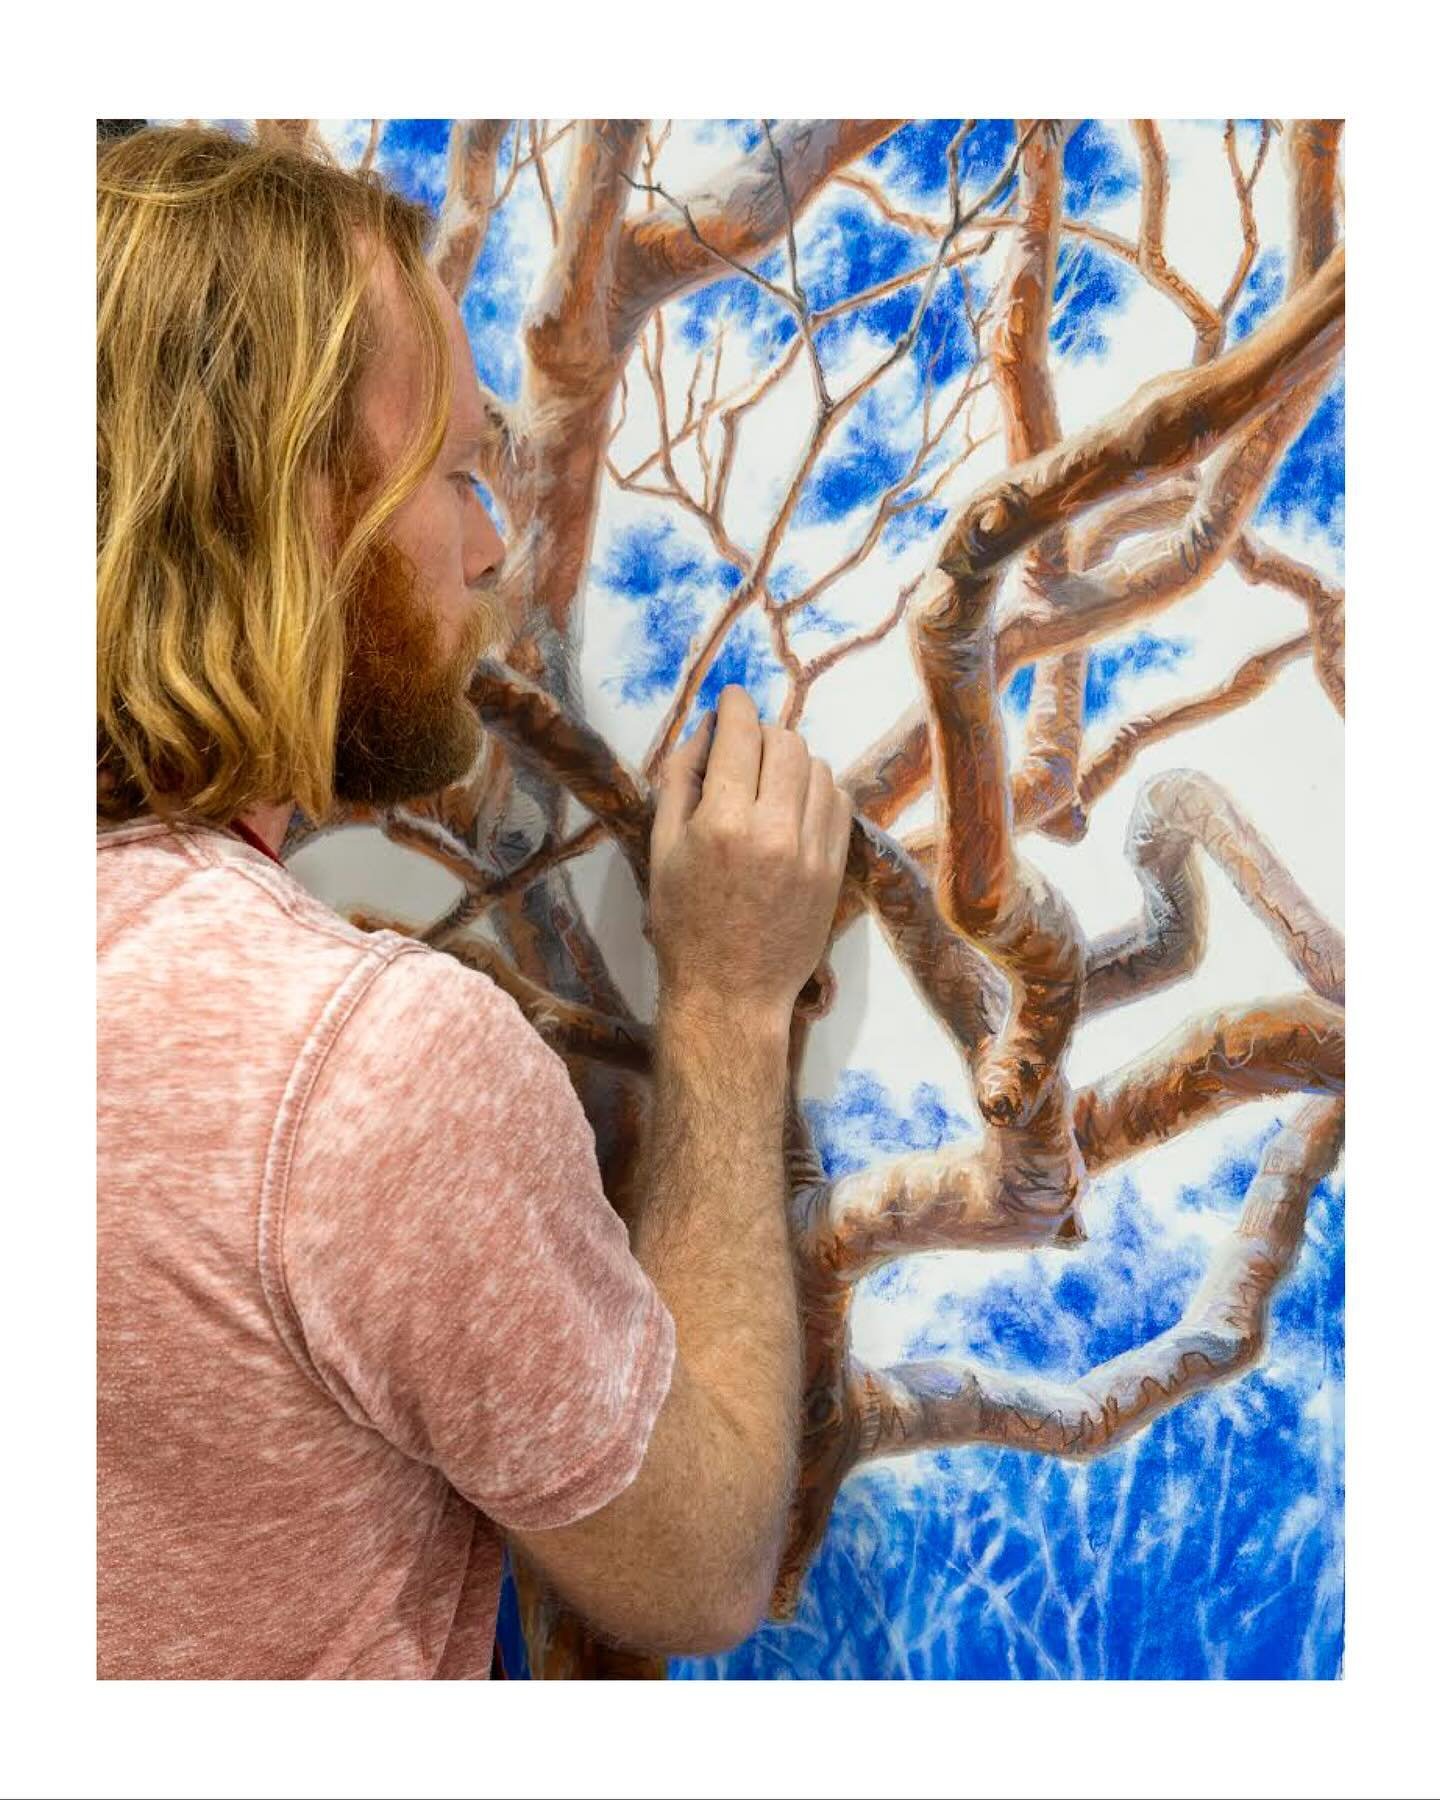 Not long now until the opening of Tim Owers debut Sydney art exhibition :
.
ANATOMY OF THE ANGOPHORA 
.
Thursday May 2nd 6pm
50 Frenchs rd Willoughby 
.
Register yourself for the opening via link in bio, tickets are being snatched up really fast, get